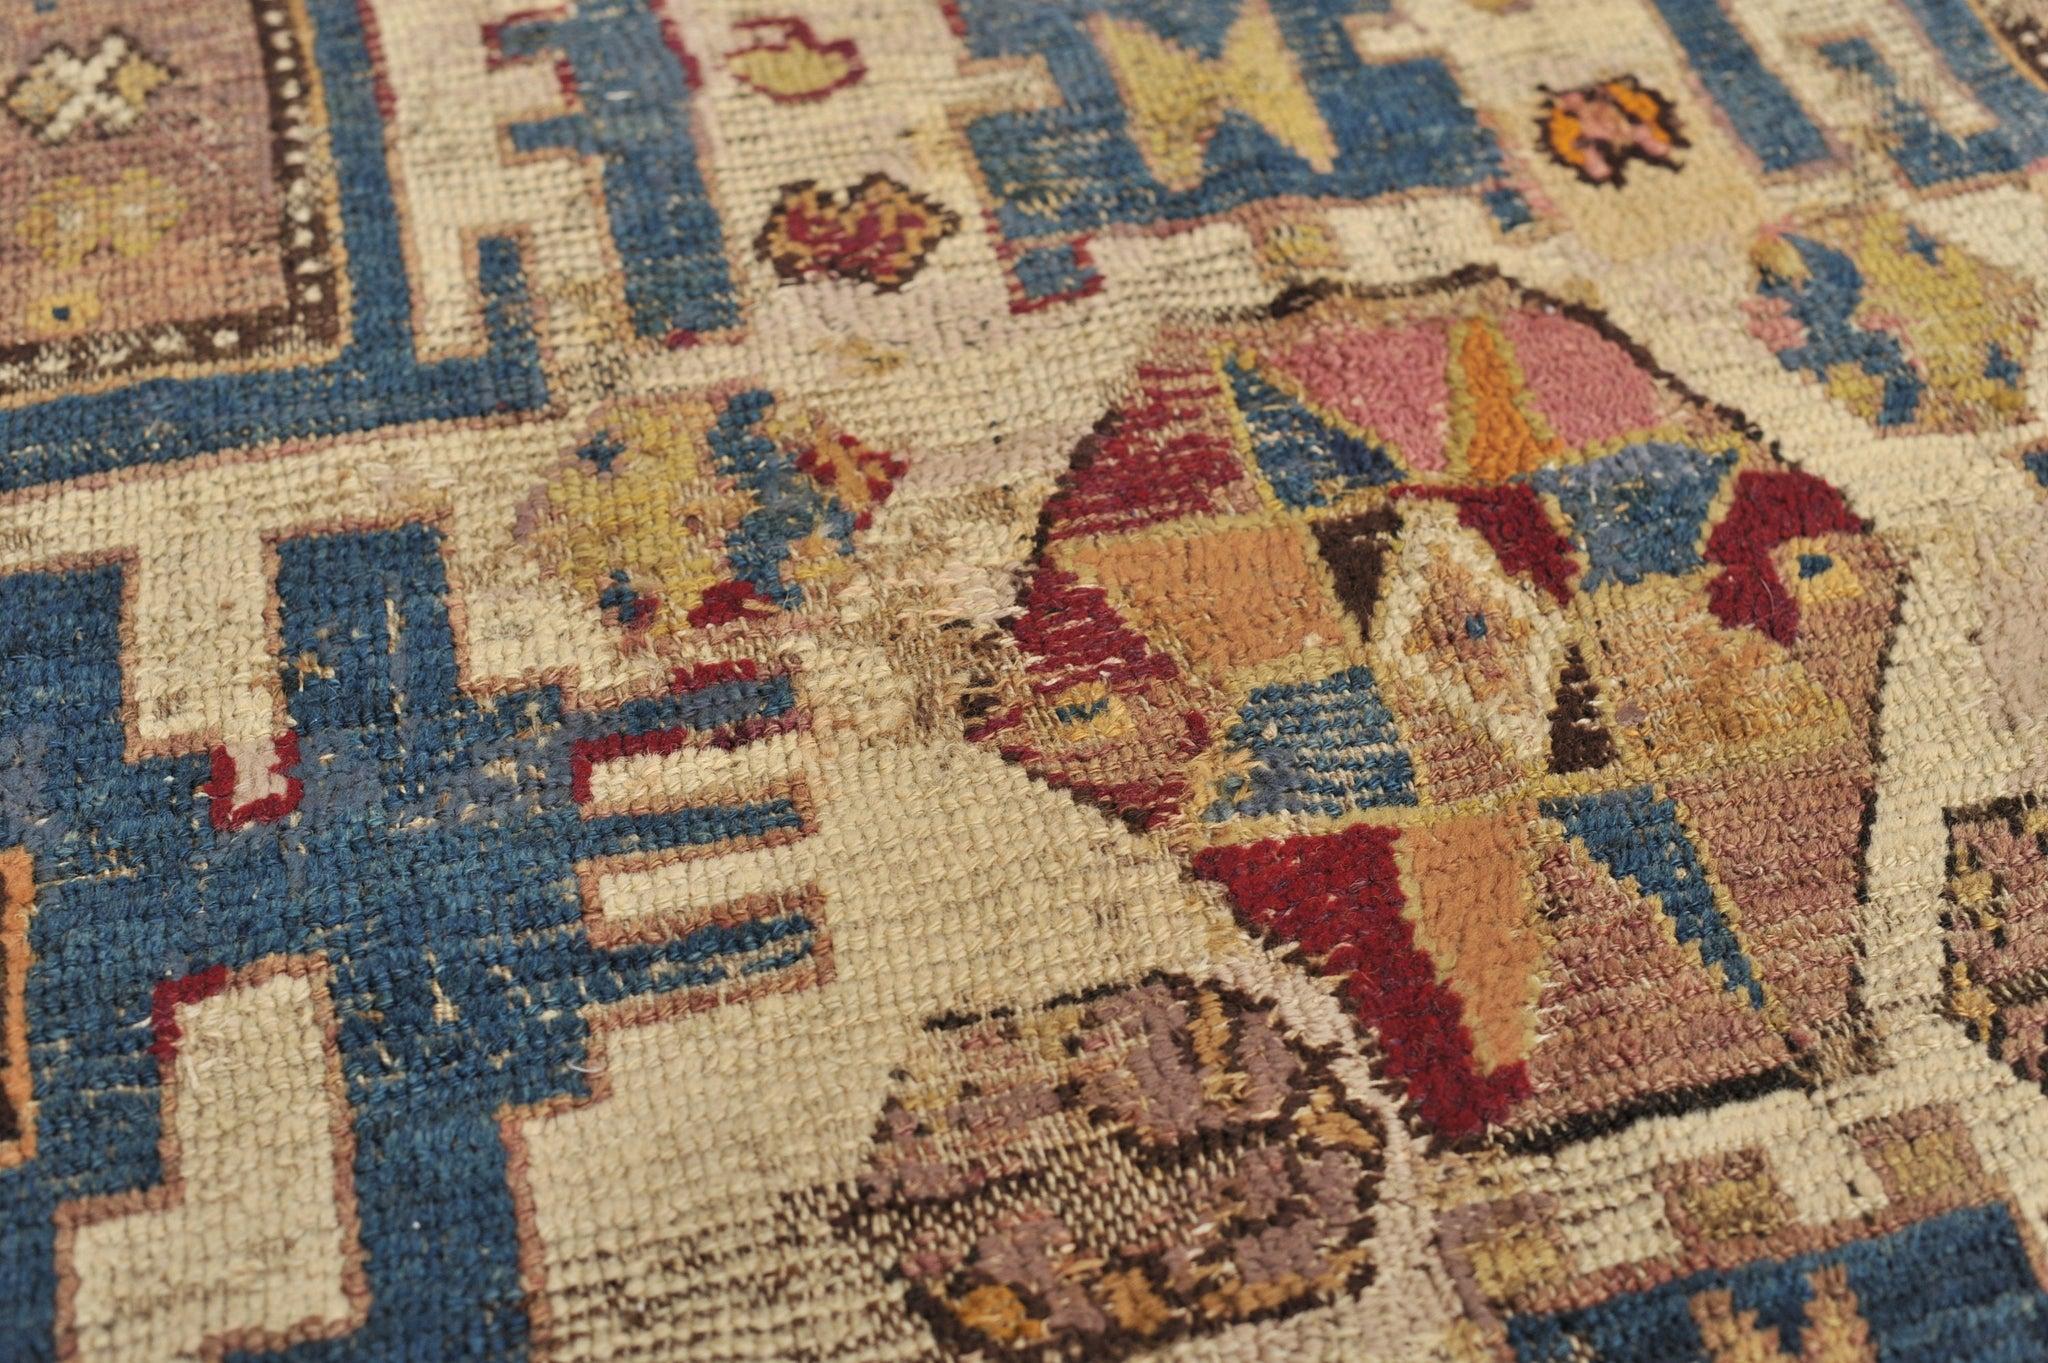 Antique Textile Rug with Lavender, Sunflower Yellows, & Blues, c. 1900 For Sale 1